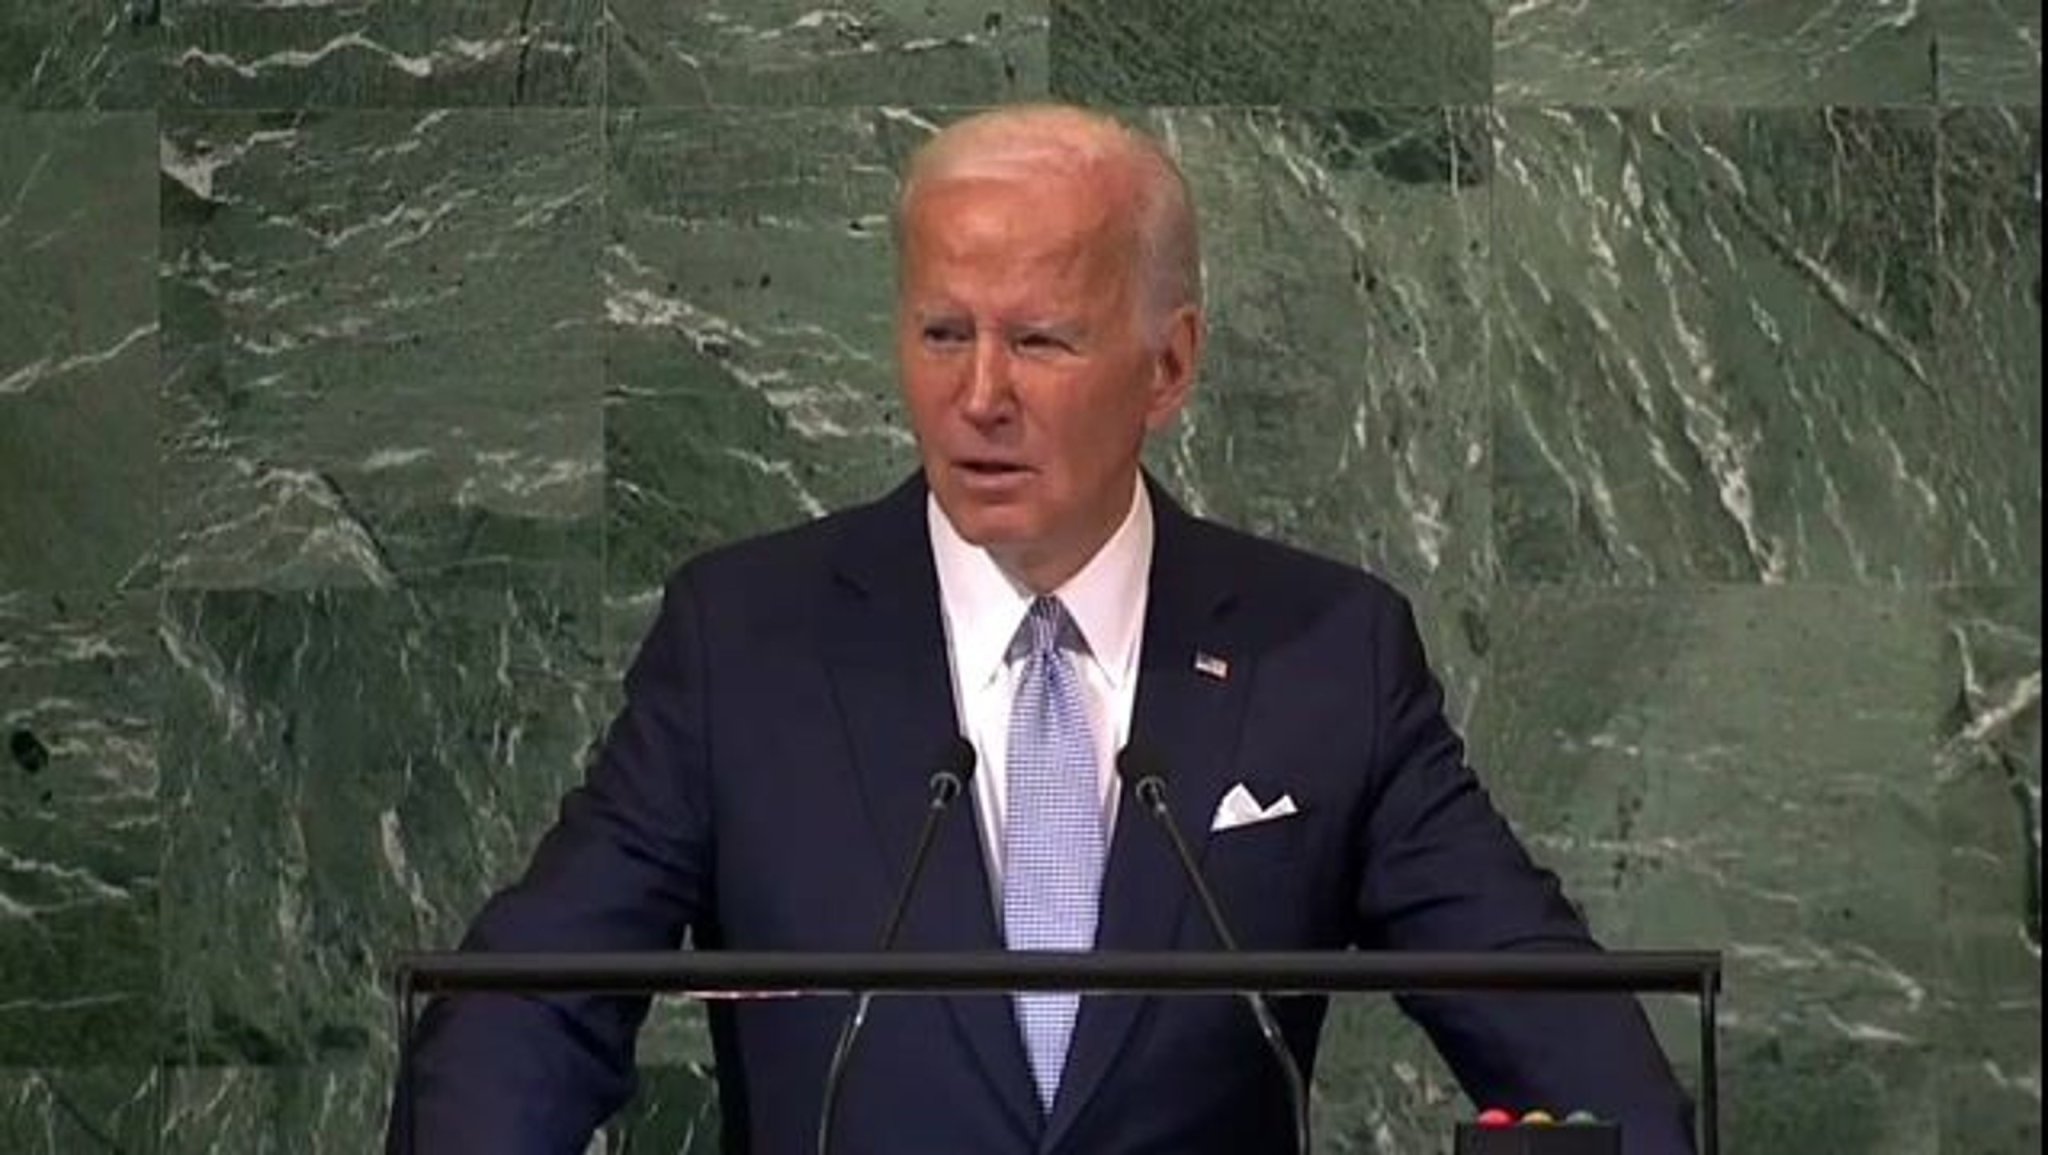 President Biden addresses the competition between the U.S. and China.